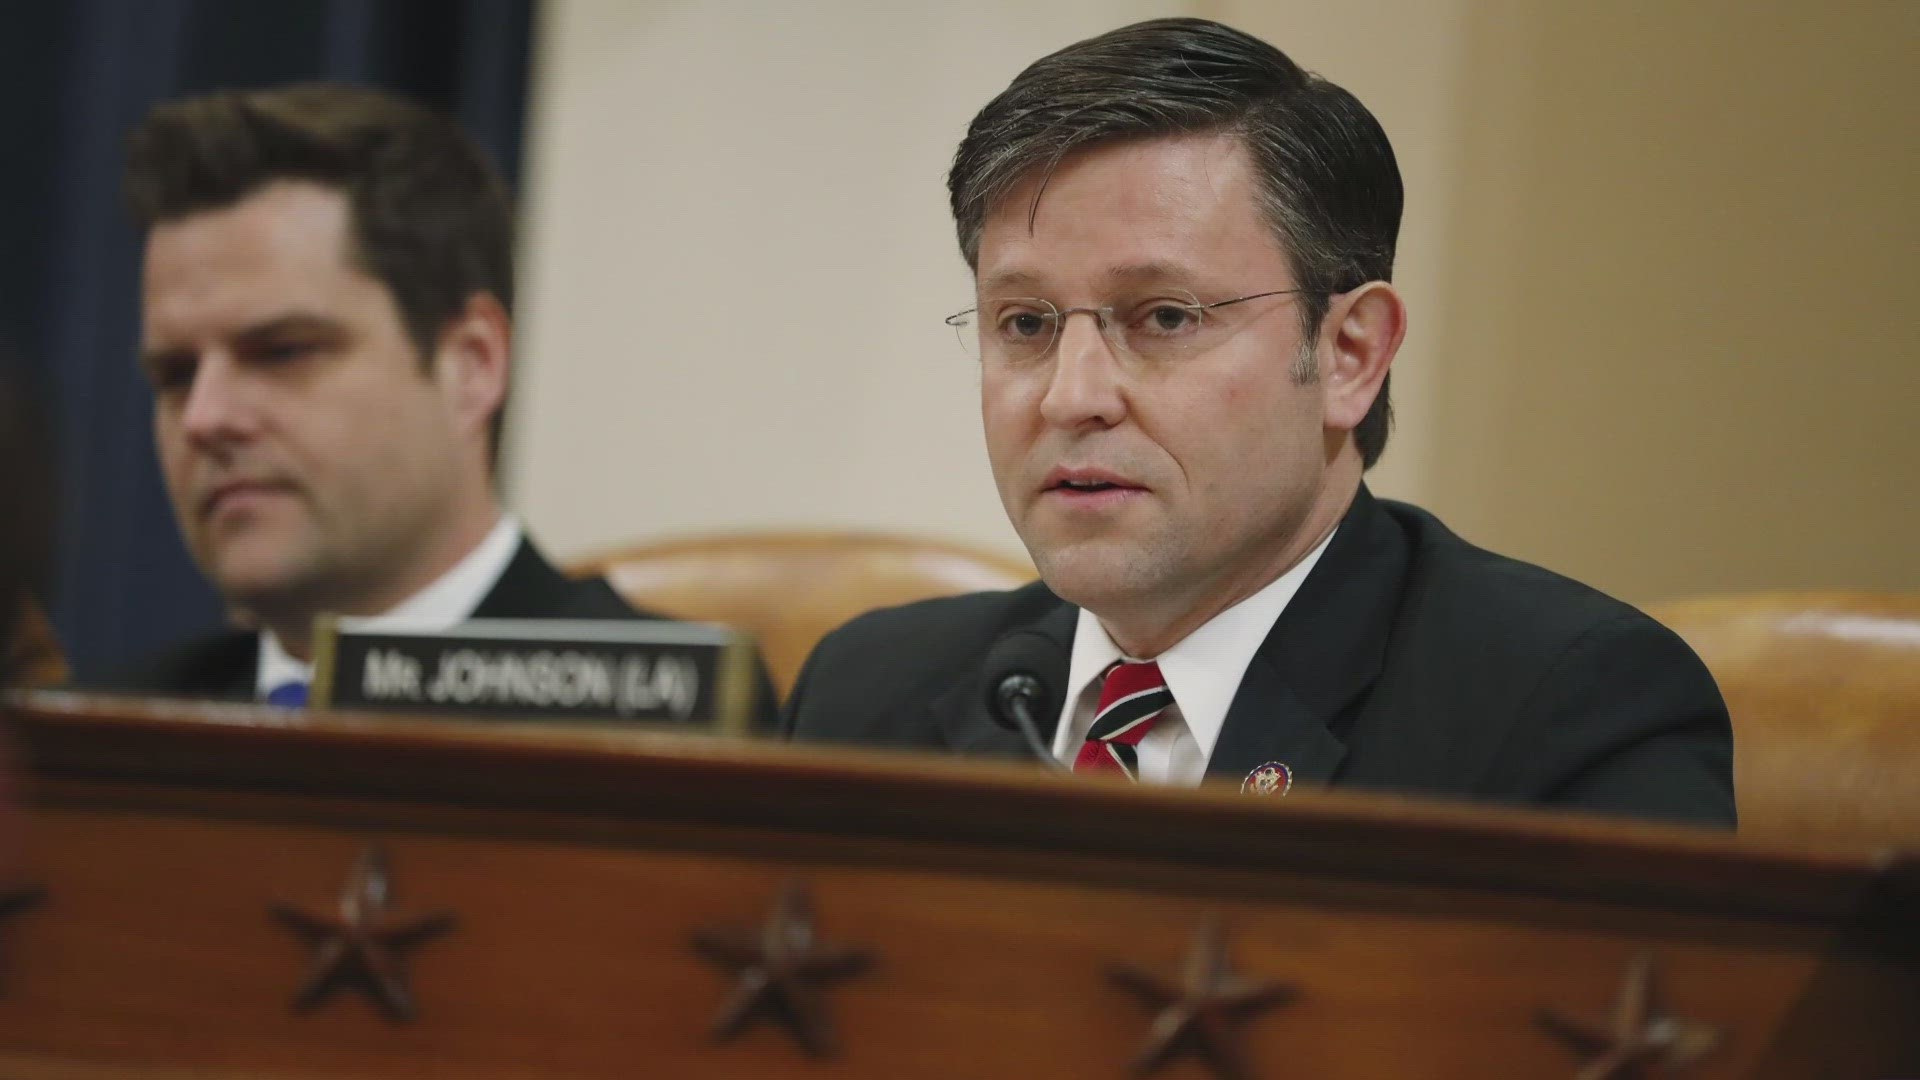 Republicans elect Mike Johnson to become next House speaker